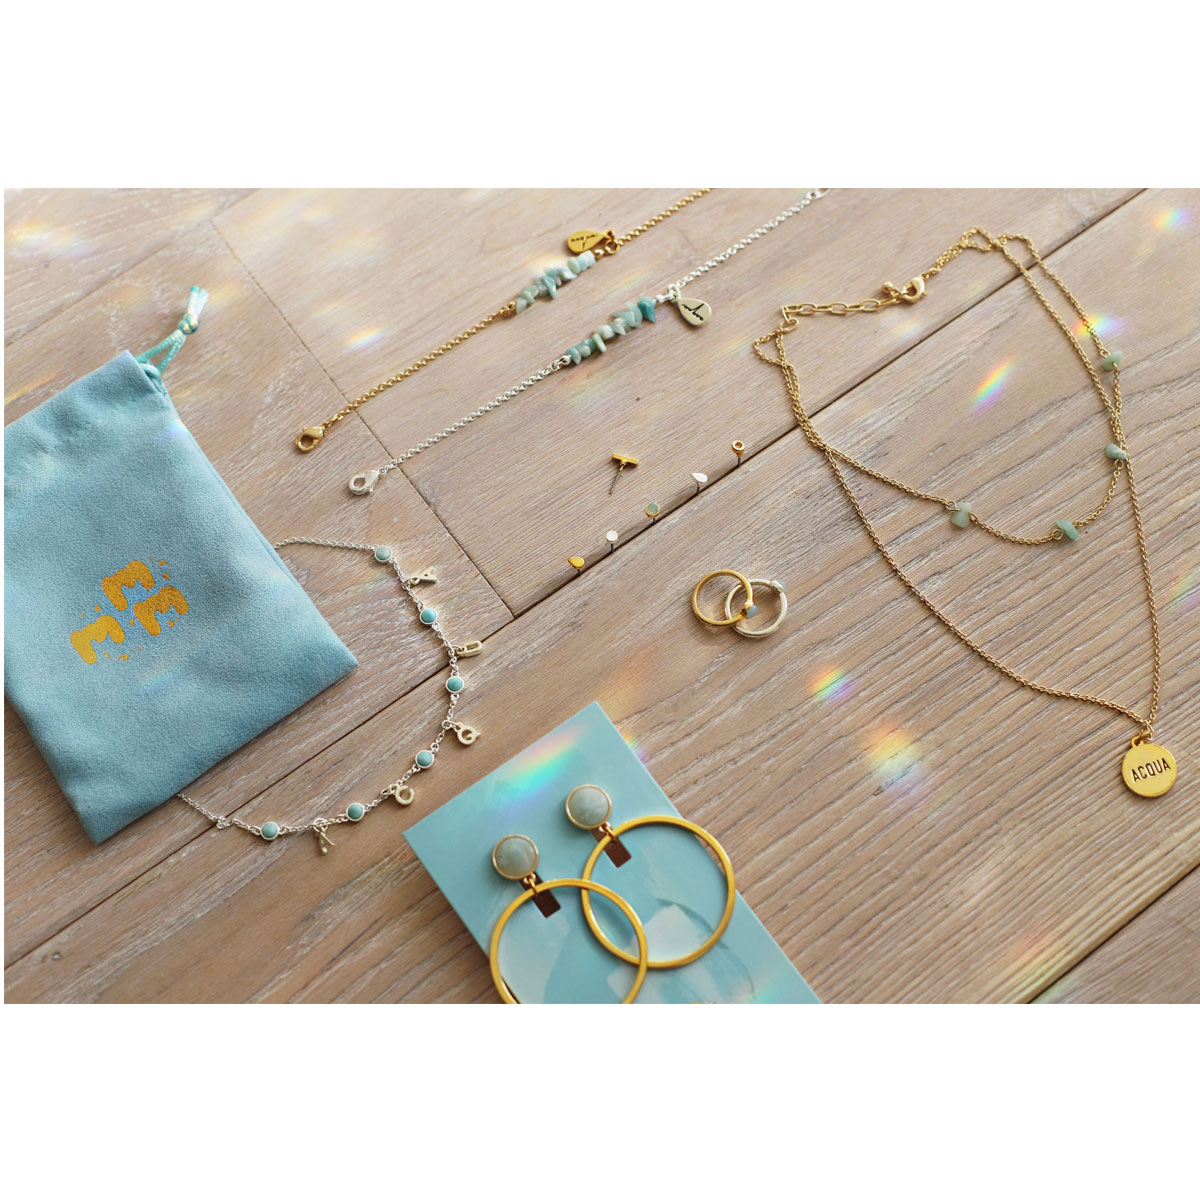 Marzia Acqua jewelry Collection with custom cards and jewelry pouch ...